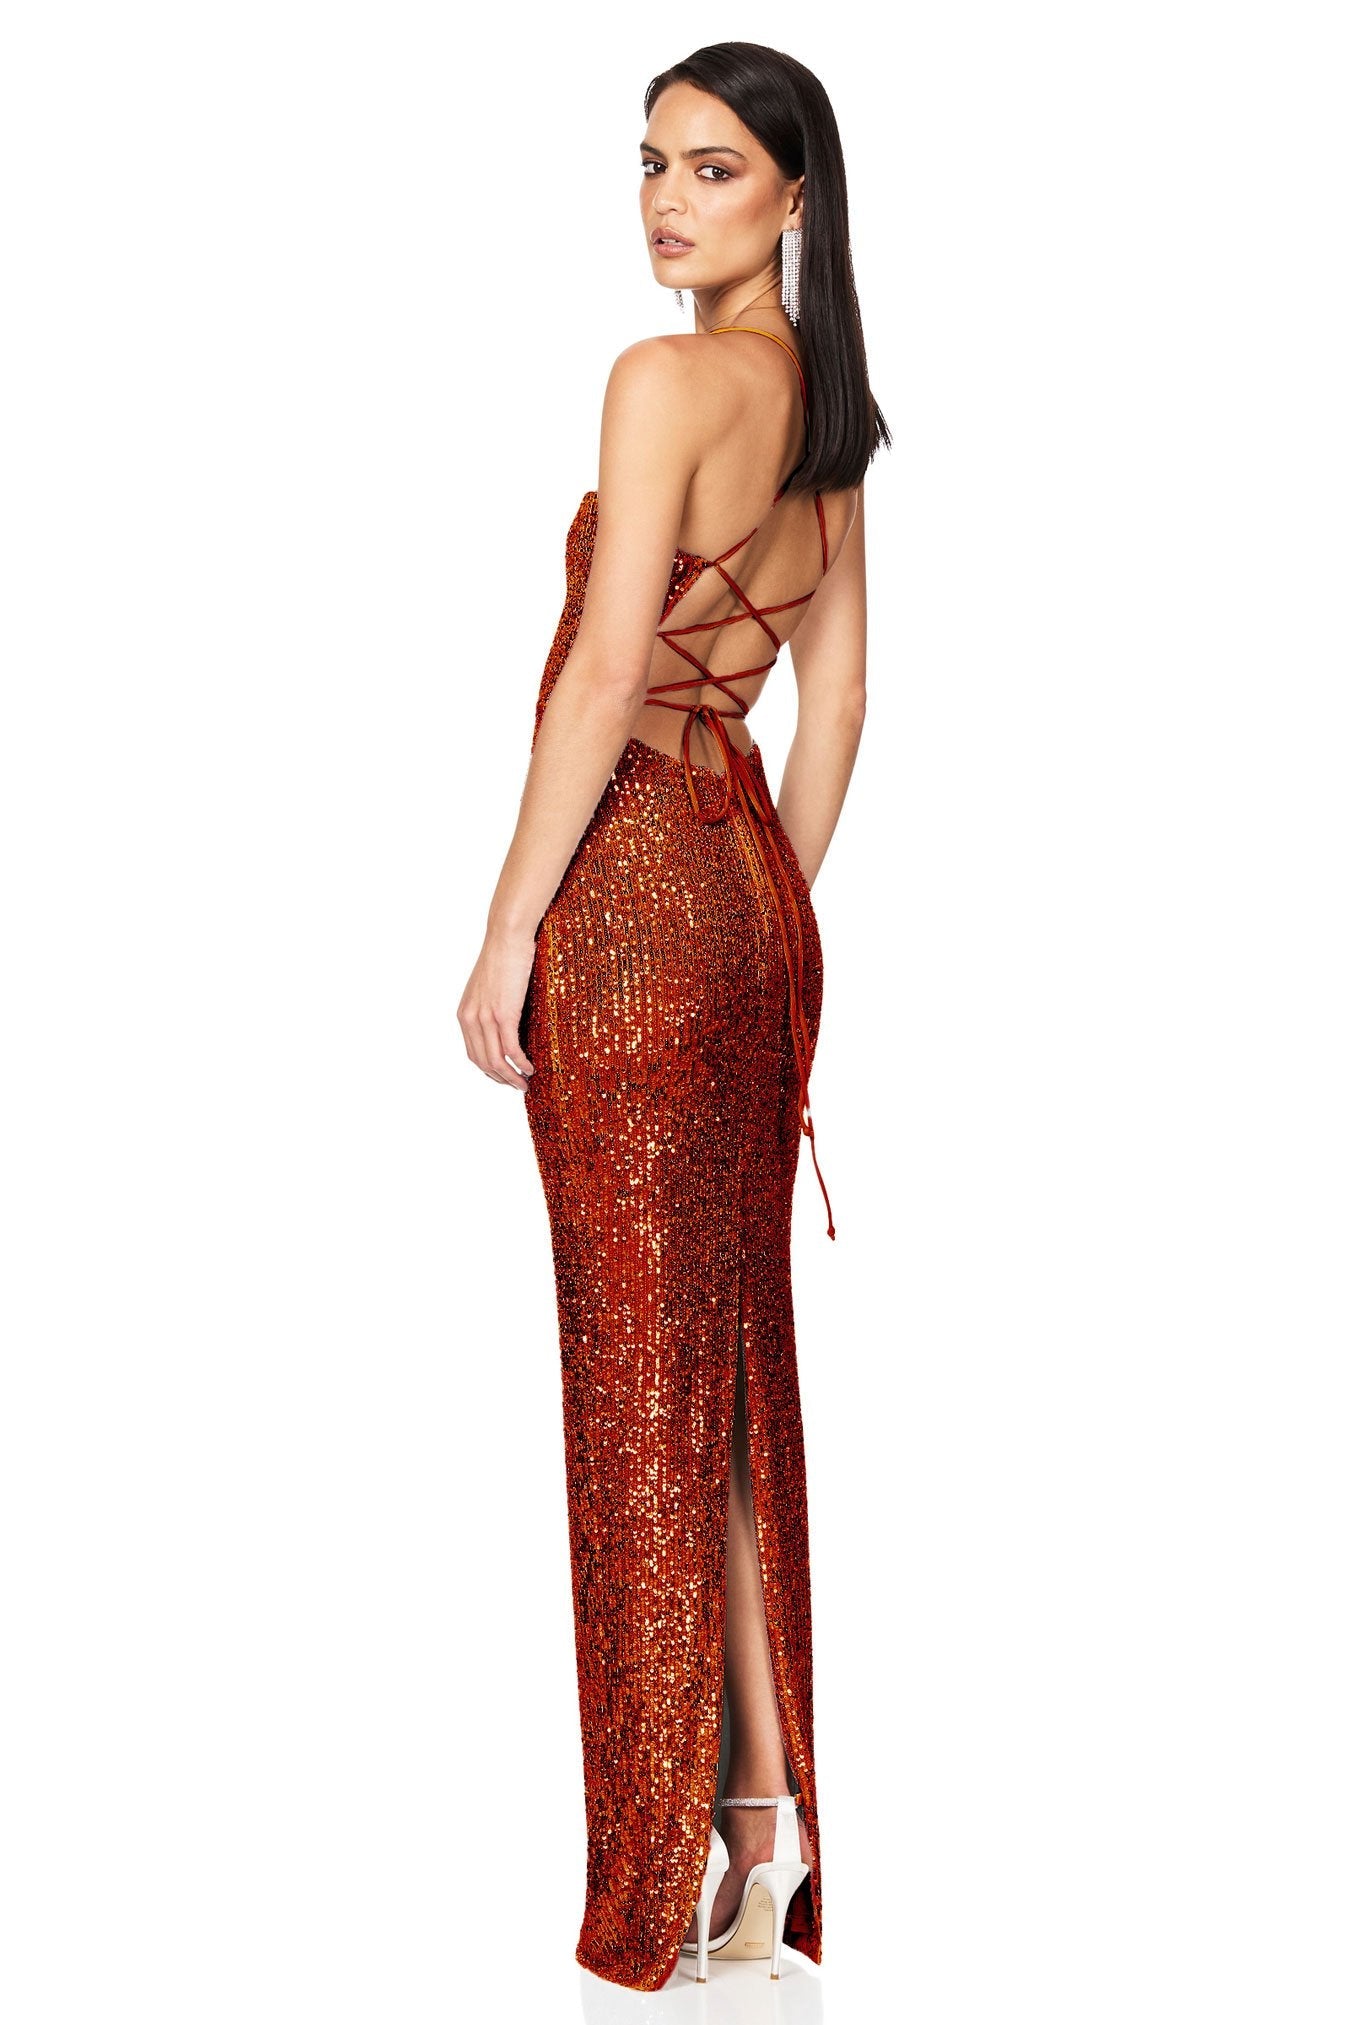 Lumina Lace Back Gown - Nookie